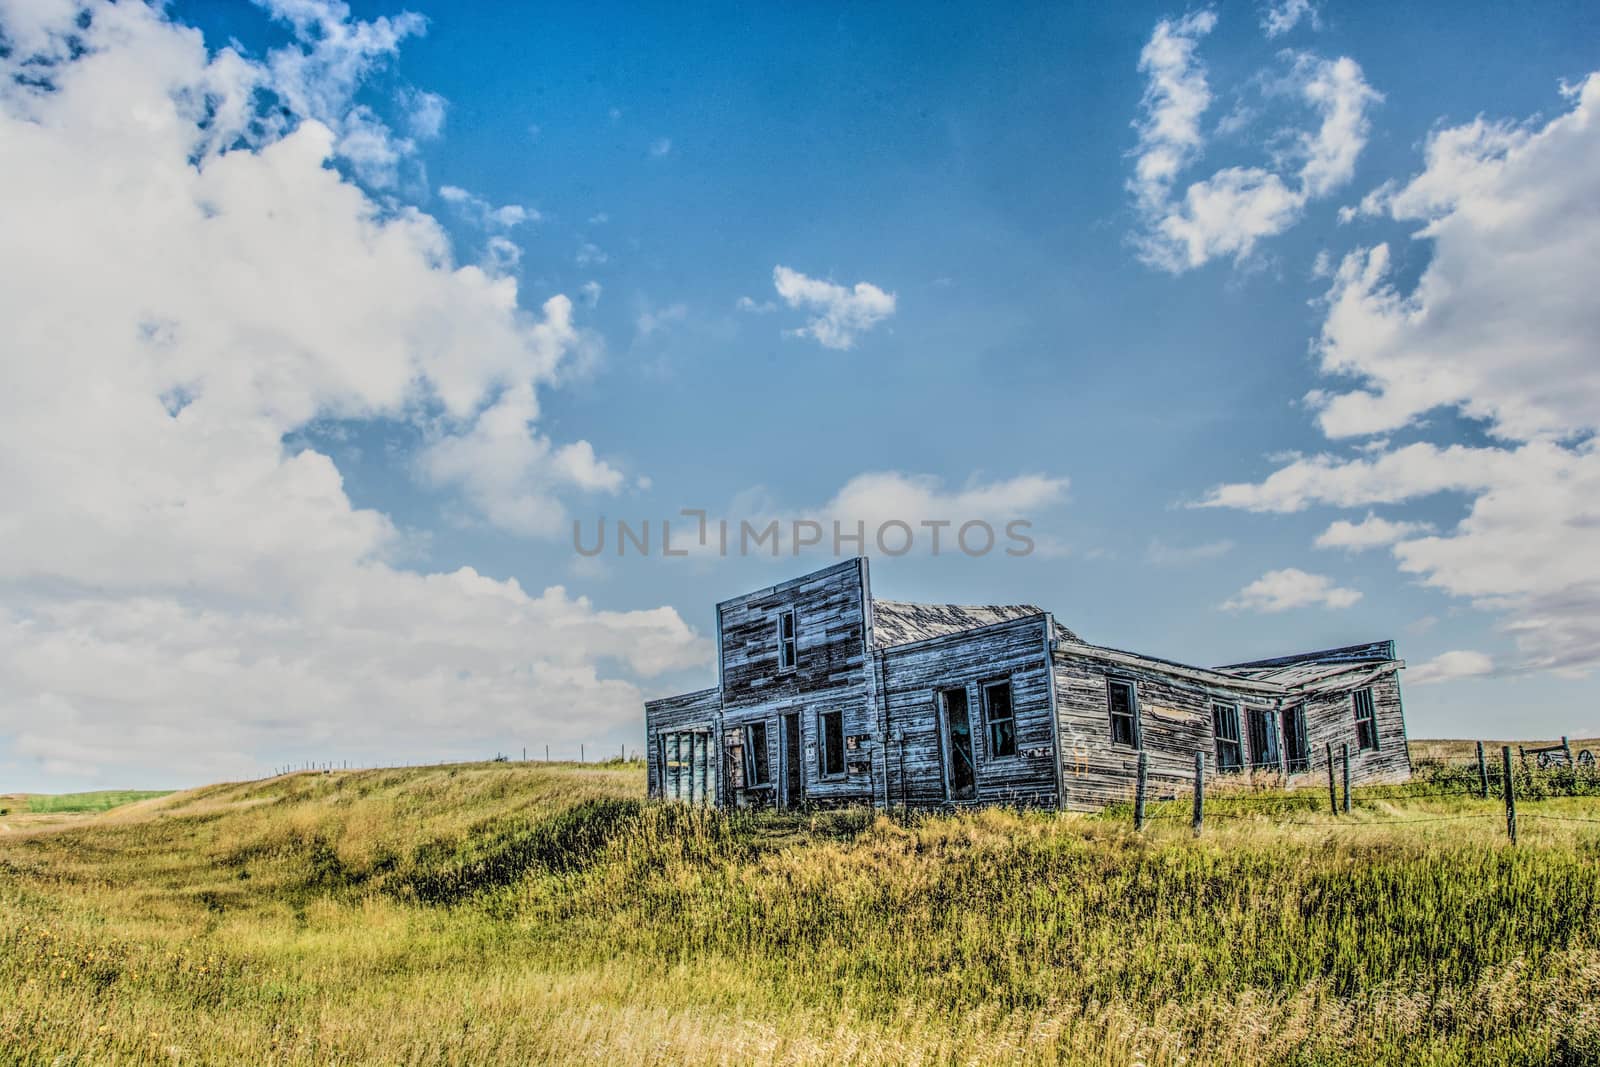 Abandoned building in fallow field under cloud studded blue skies